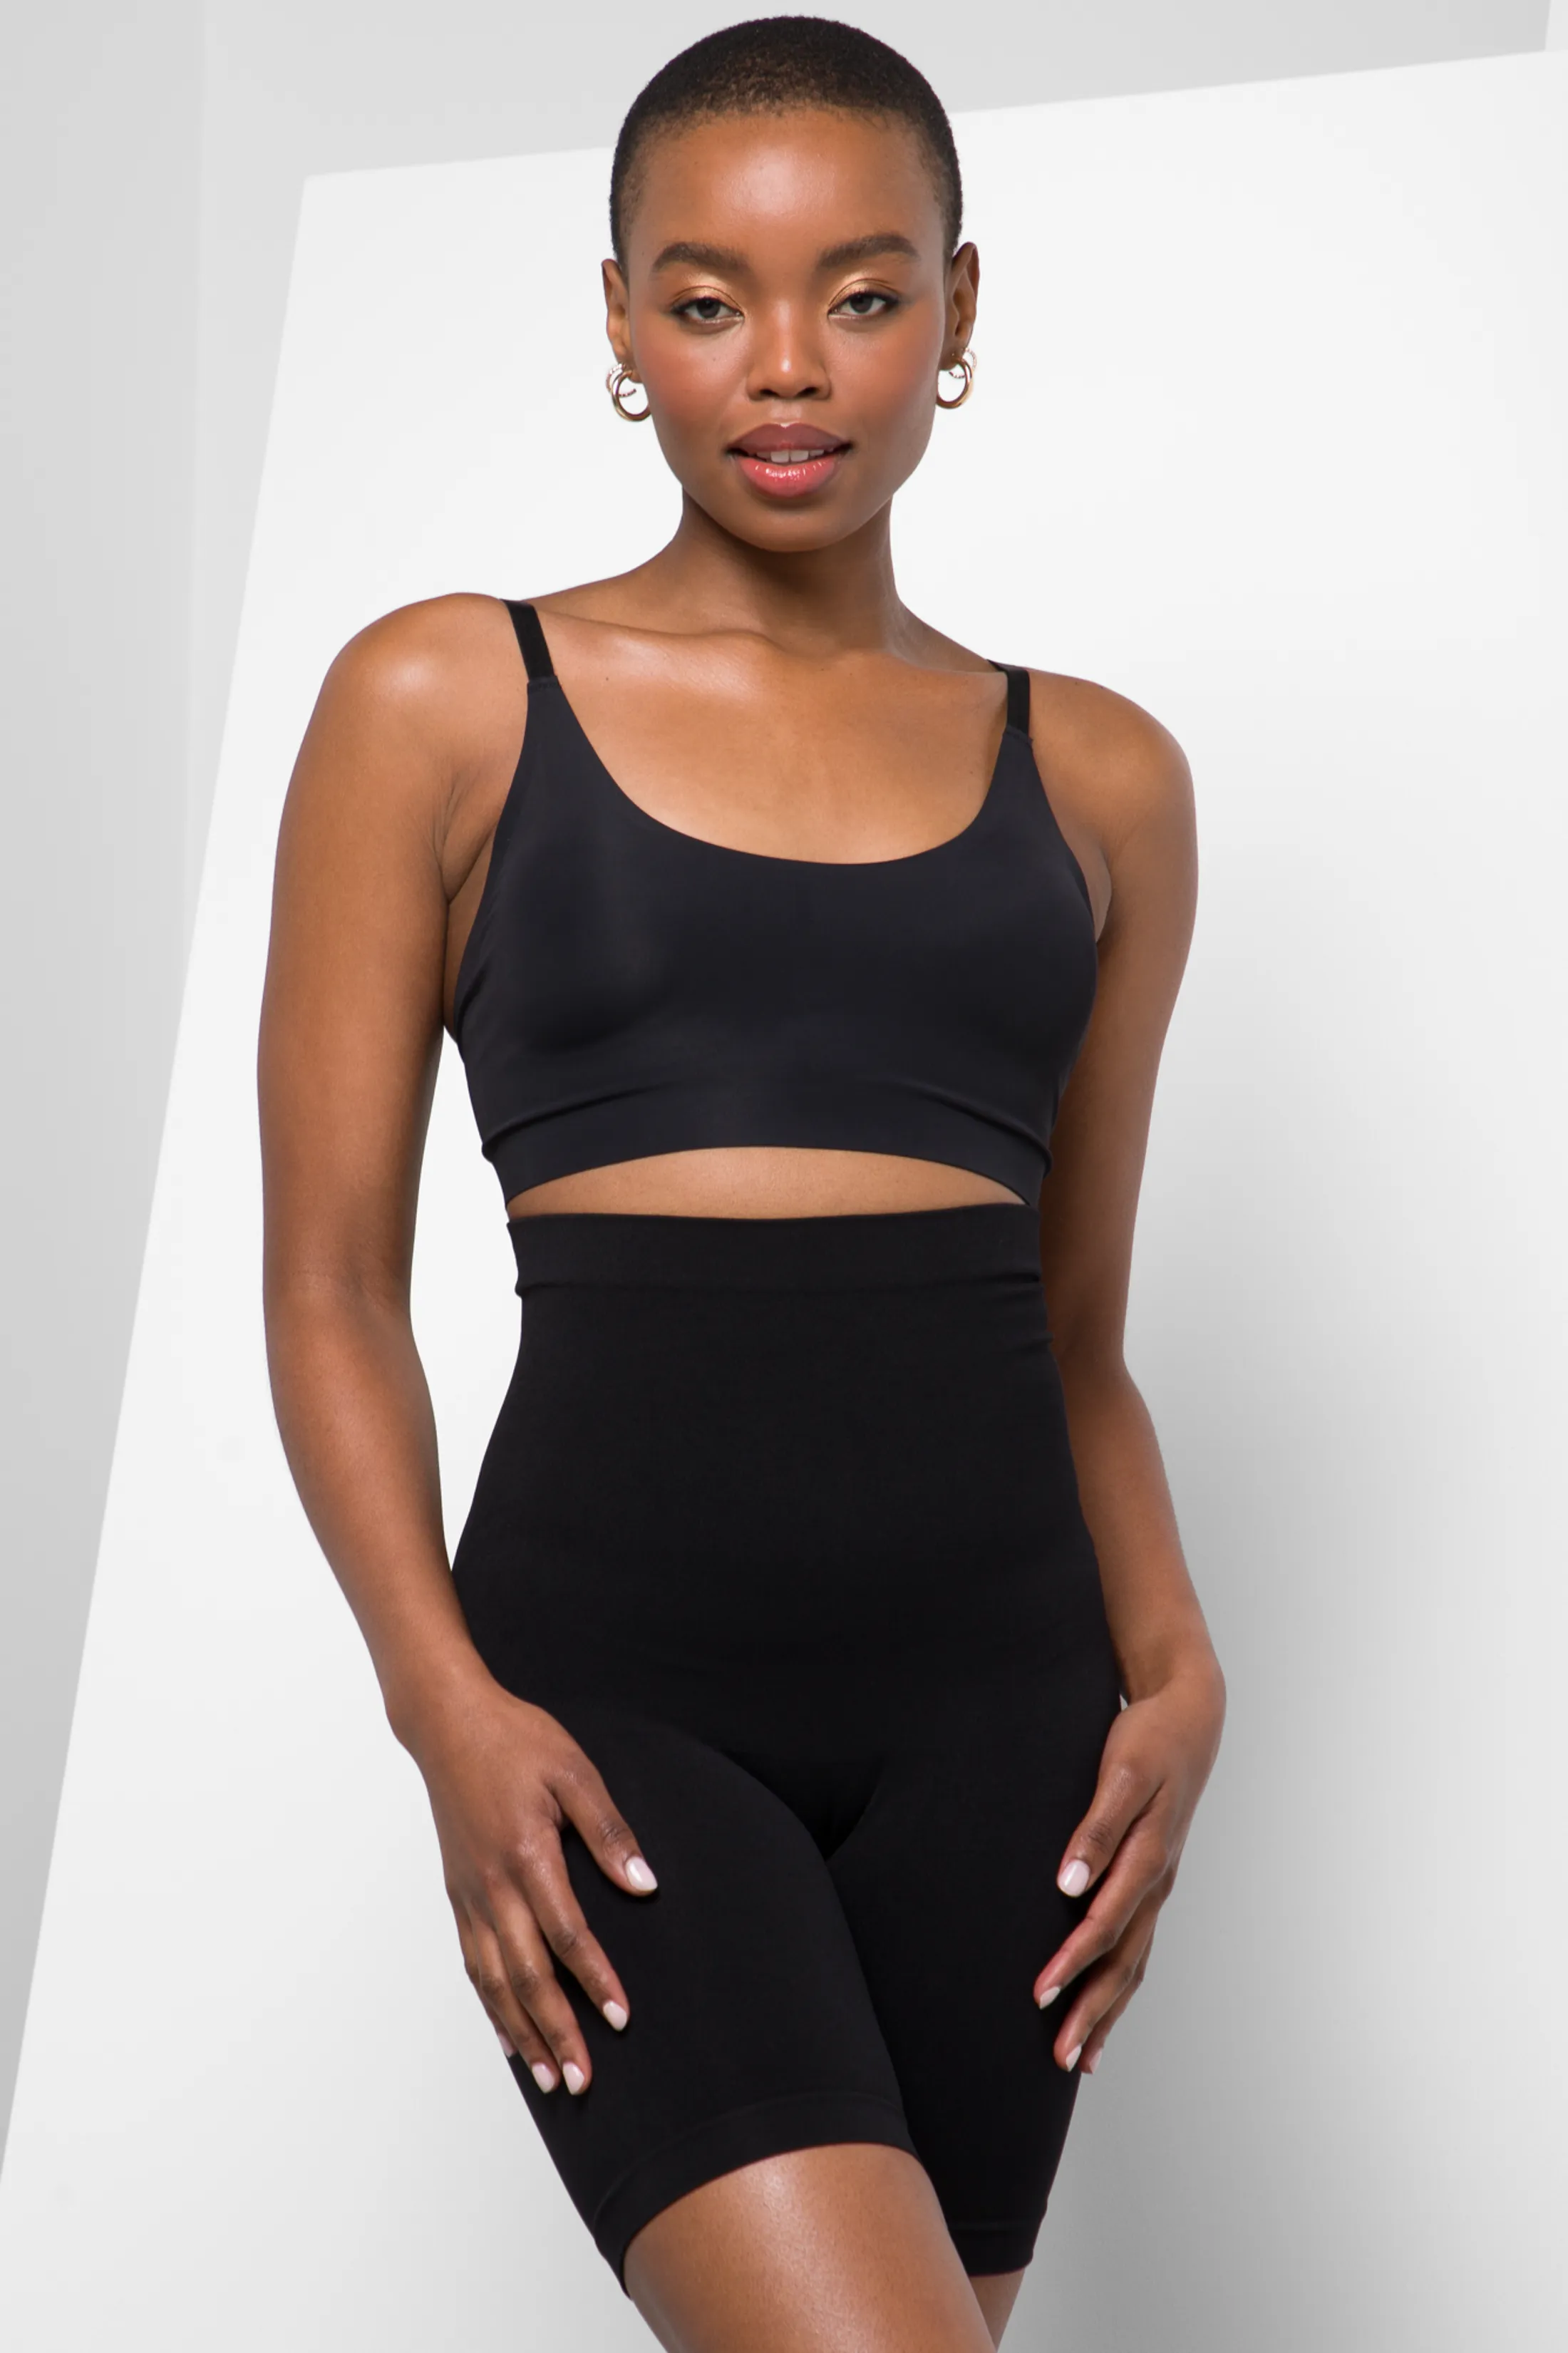 Ackermans - SAVE 30.00 on seamless shapewear, was 109.95, NOW 79.95. Find  your fit, for less